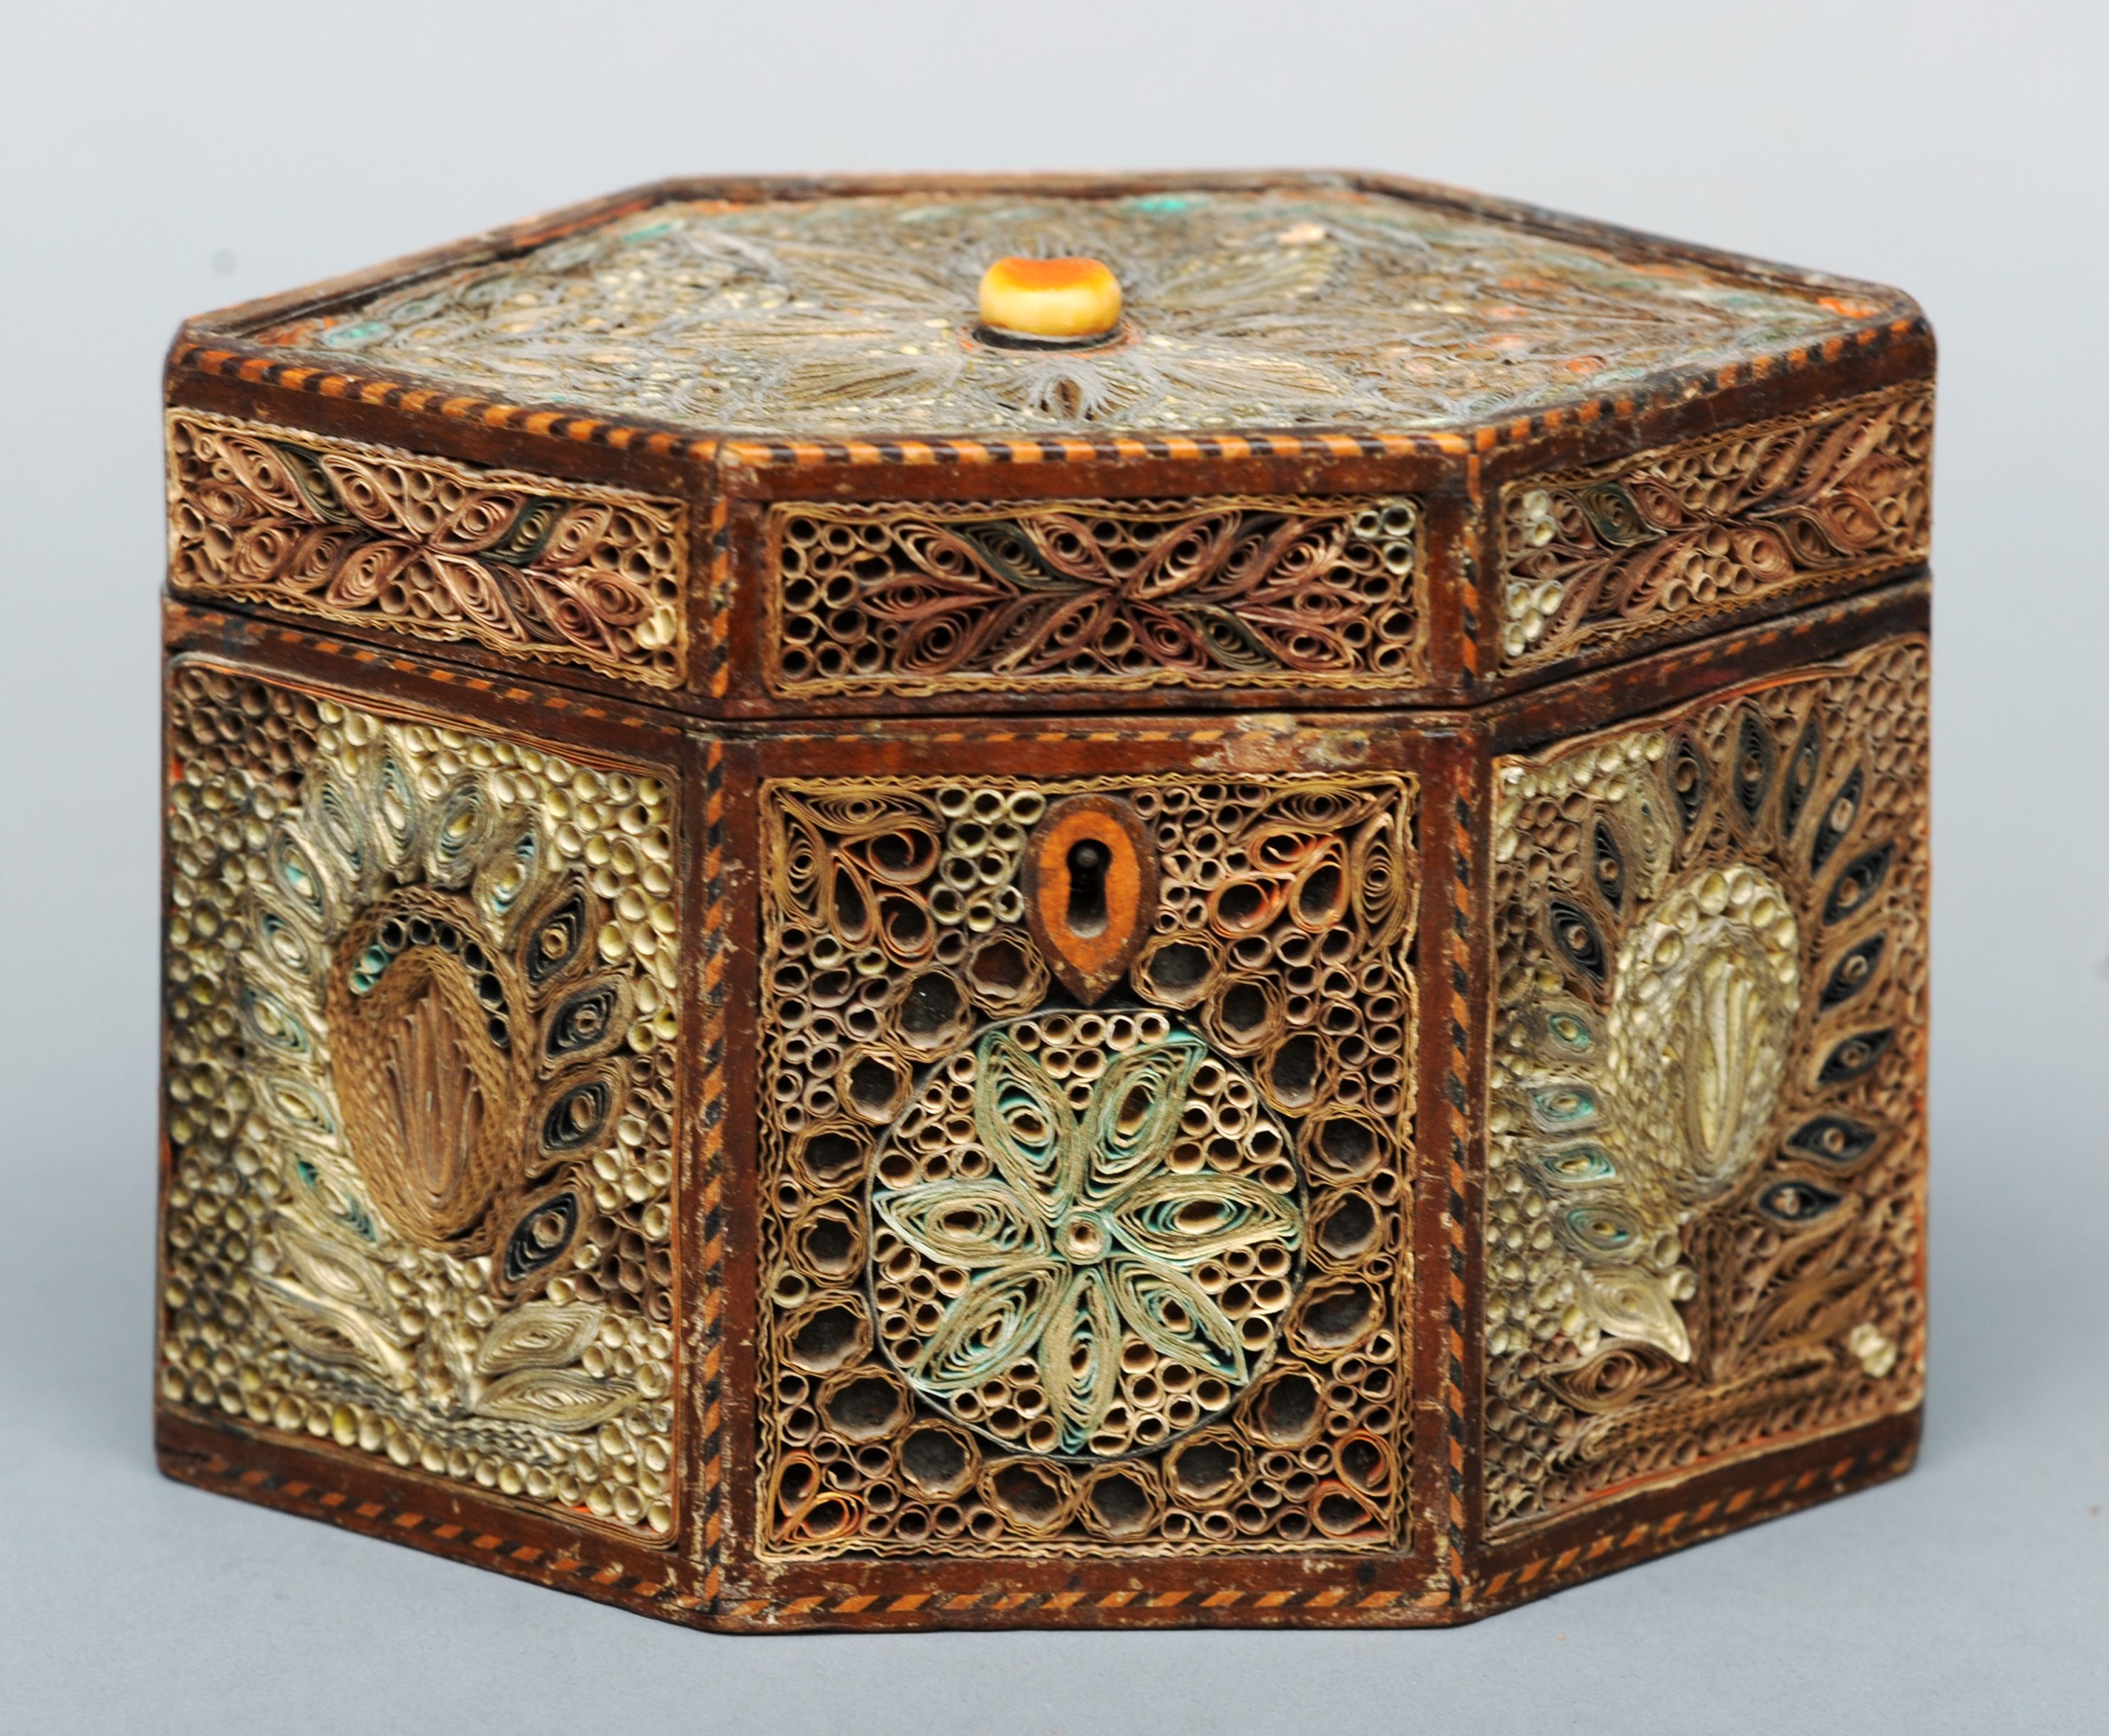 An 18th century scroll work tea caddy The hexagonal box with a hinged lid and decorated allover with